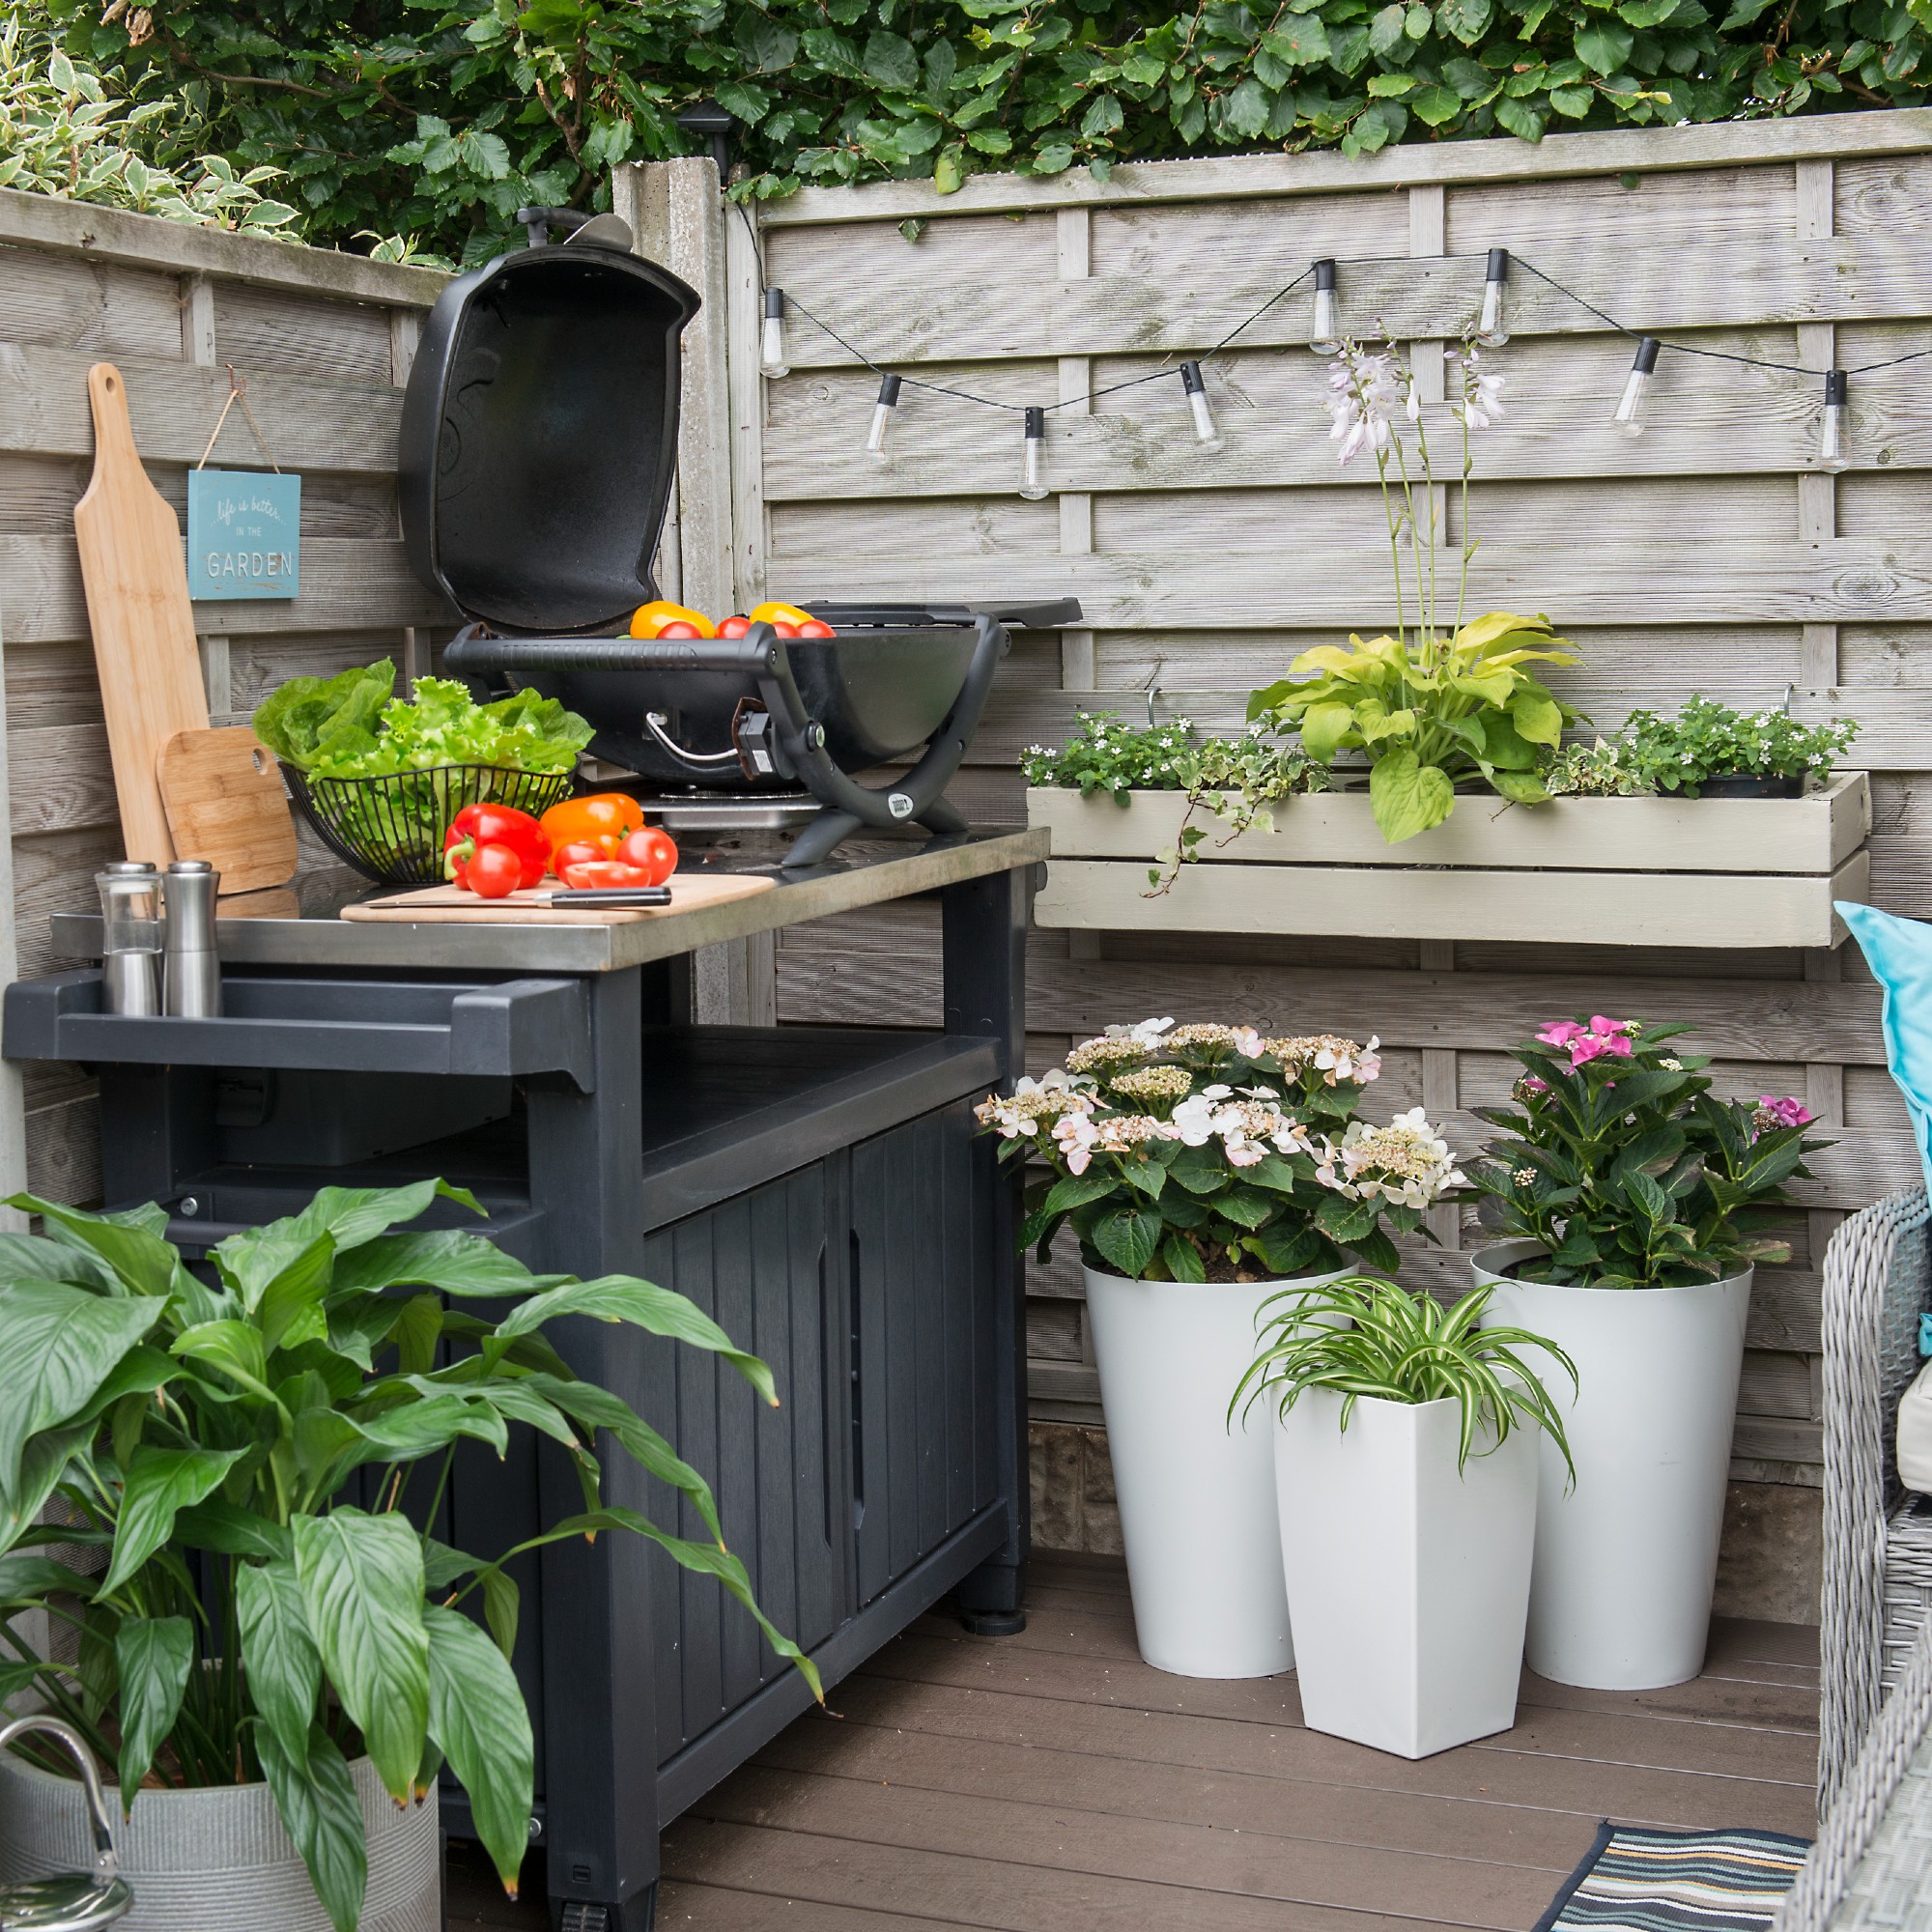 An outdoor kitchen on a patio with a grill cooking food